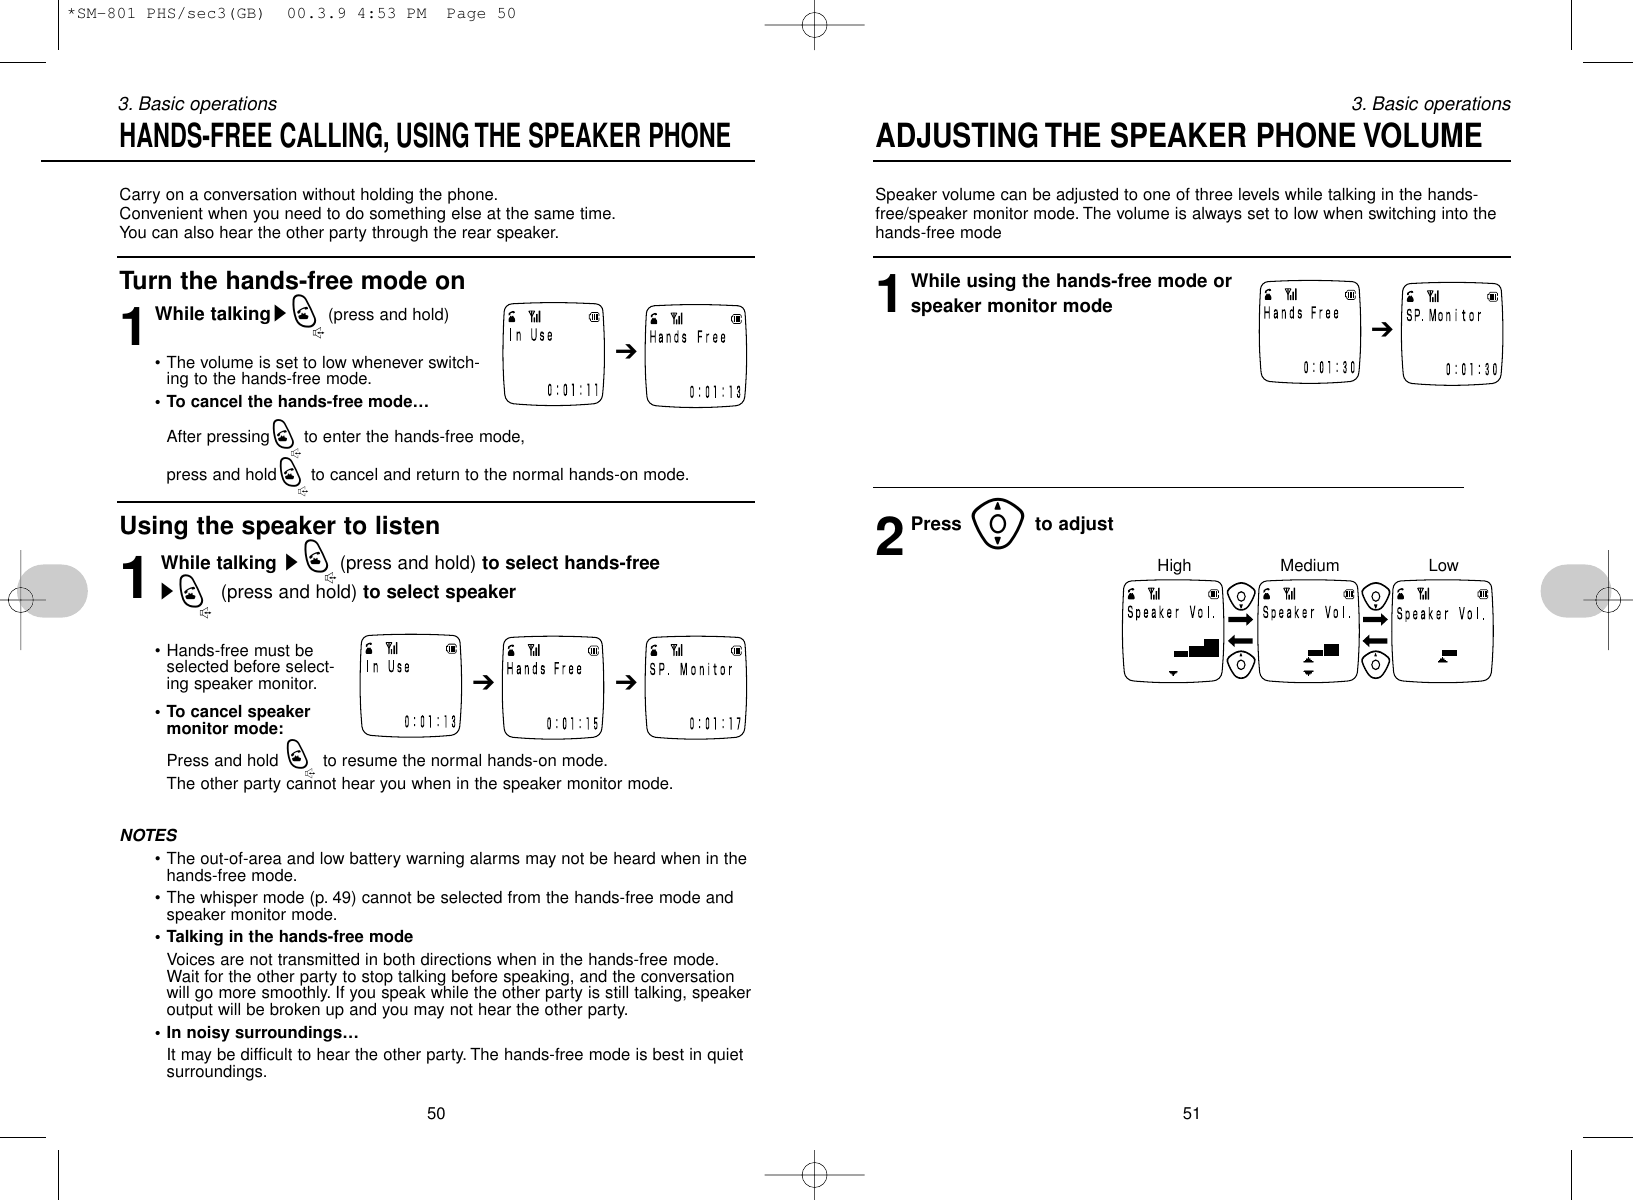 Speaker volume can be adjusted to one of three levels while talking in the hands-free/speaker monitor mode. The volume is always set to low when switching into thehands-free mode 1While using the hands-free mode orspeaker monitor mode2Press [to adjust513. Basic operationsCarry on a conversation without holding the phone.Convenient when you need to do something else at the same time.You can also hear the other party through the rear speaker.Turn the hands-free mode on1While talkingsQ(press and hold)• The volume is set to low whenever switch-ing to the hands-free mode.• To cancel the hands-free mode…After pressingQto enter the hands-free mode, press and holdQto cancel and return to the normal hands-on mode.Using the speaker to listen1While talking sQ(press and hold) to select hands-freesQ(press and hold) to select speaker• Hands-free must beselected before select-ing speaker monitor.• To cancel speakermonitor mode:Press and hold Qto resume the normal hands-on mode.The other party cannot hear you when in the speaker monitor mode.NOTES• The out-of-area and low battery warning alarms may not be heard when in thehands-free mode.• The whisper mode (p. 49) cannot be selected from the hands-free mode andspeaker monitor mode.• Talking in the hands-free modeVoices are not transmitted in both directions when in the hands-free mode.Wait for the other party to stop talking before speaking, and the conversationwill go more smoothly. If you speak while the other party is still talking, speakeroutput will be broken up and you may not hear the other party.• In noisy surroundings…It may be difficult to hear the other party. The hands-free mode is best in quietsurroundings.503. Basic operationsHANDS-FREE CALLING, USING THE SPEAKER PHONE ADJUSTING THE SPEAKER PHONE VOLUME➔➔ ➔➔LowMediumHigh*SM-801 PHS/sec3(GB)  00.3.9 4:53 PM  Page 50